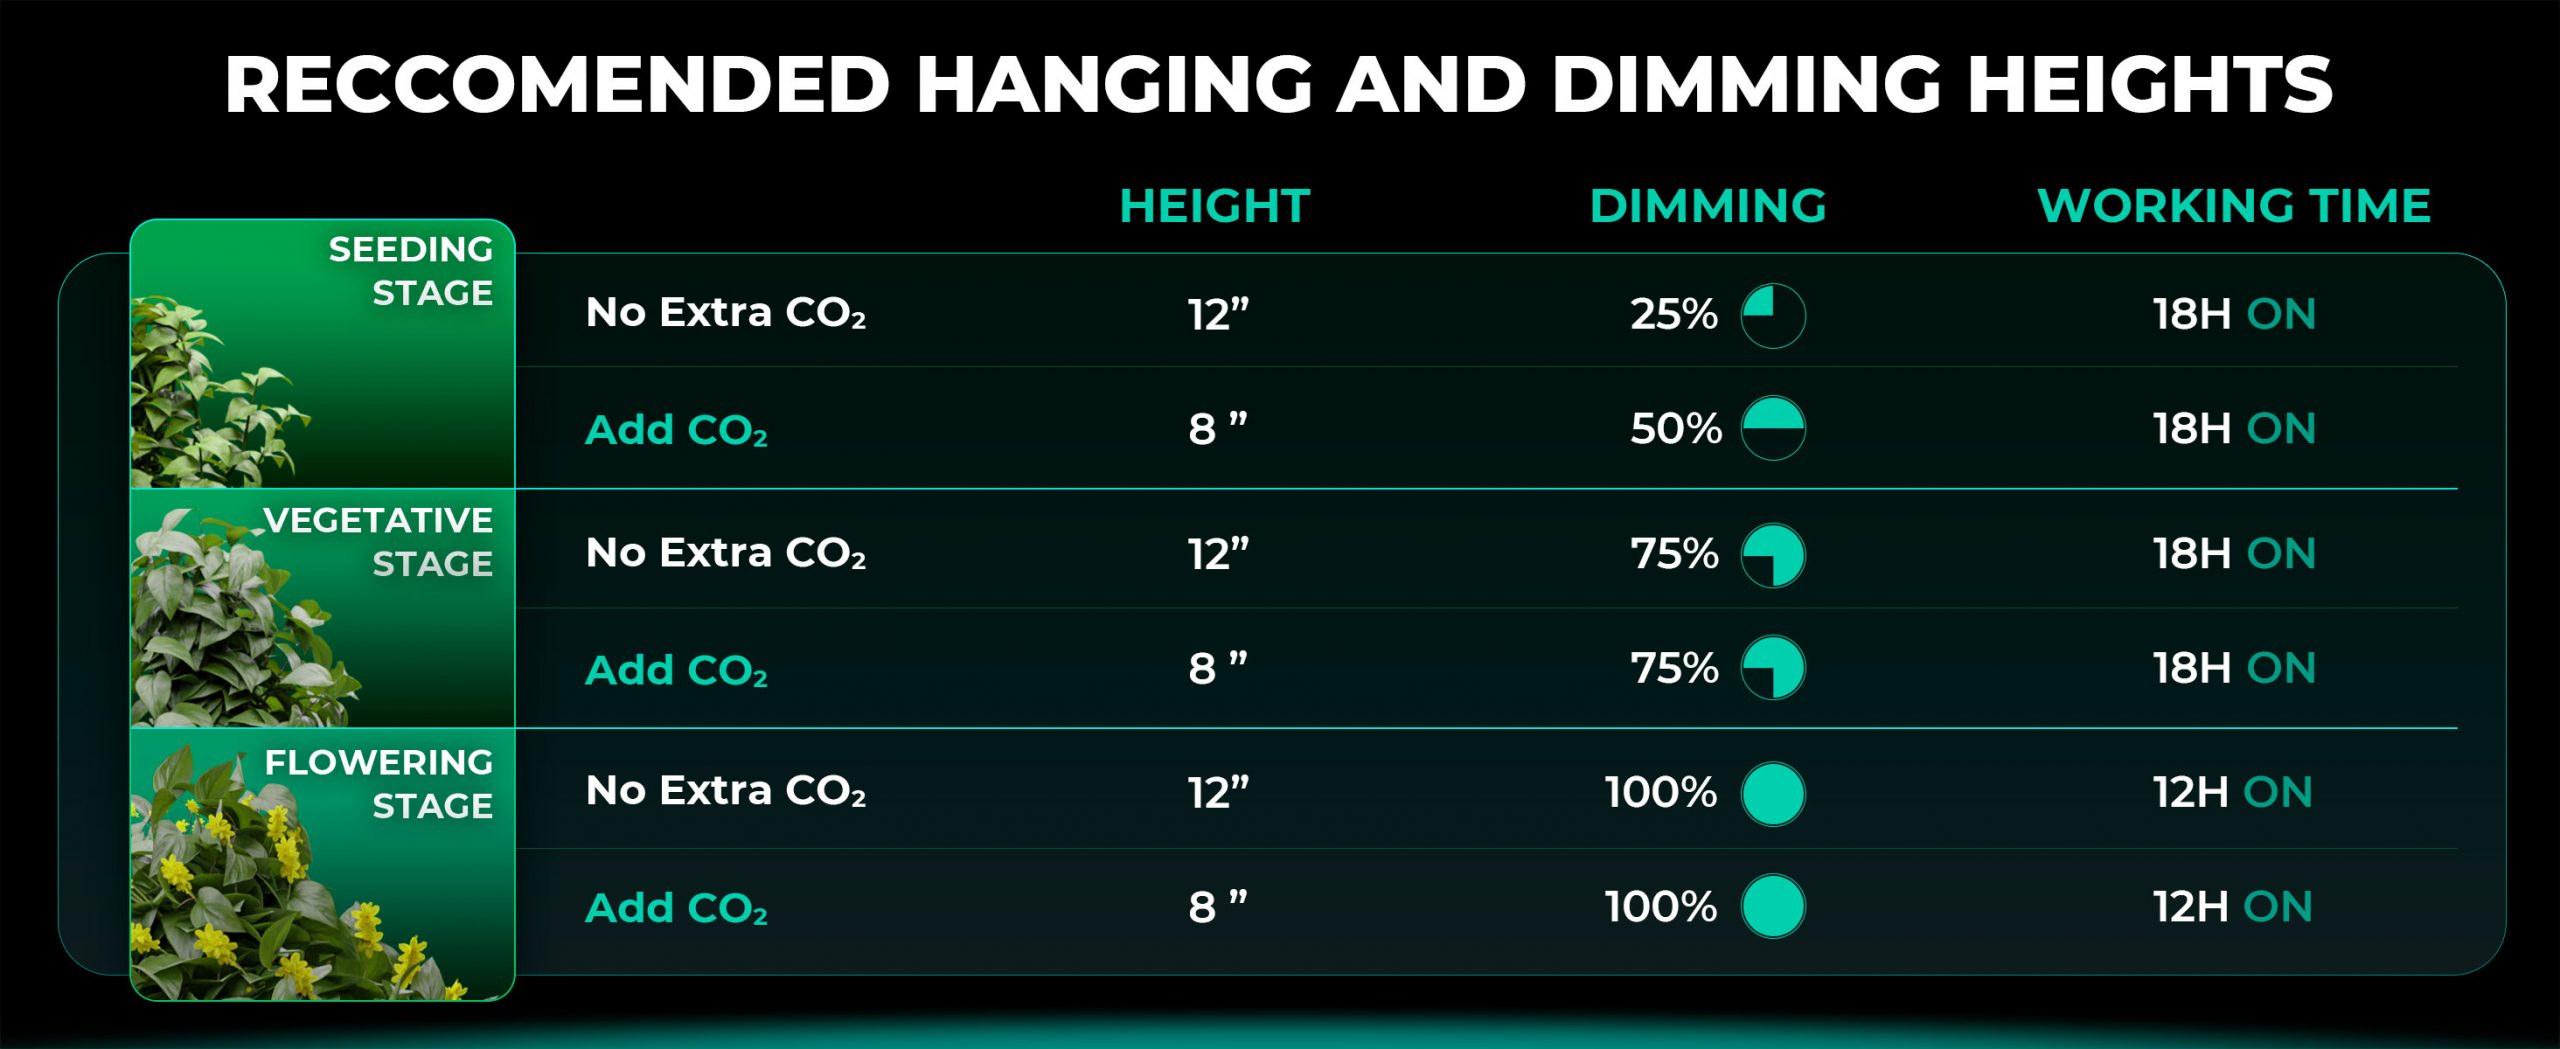 Hanging and dimming recommend